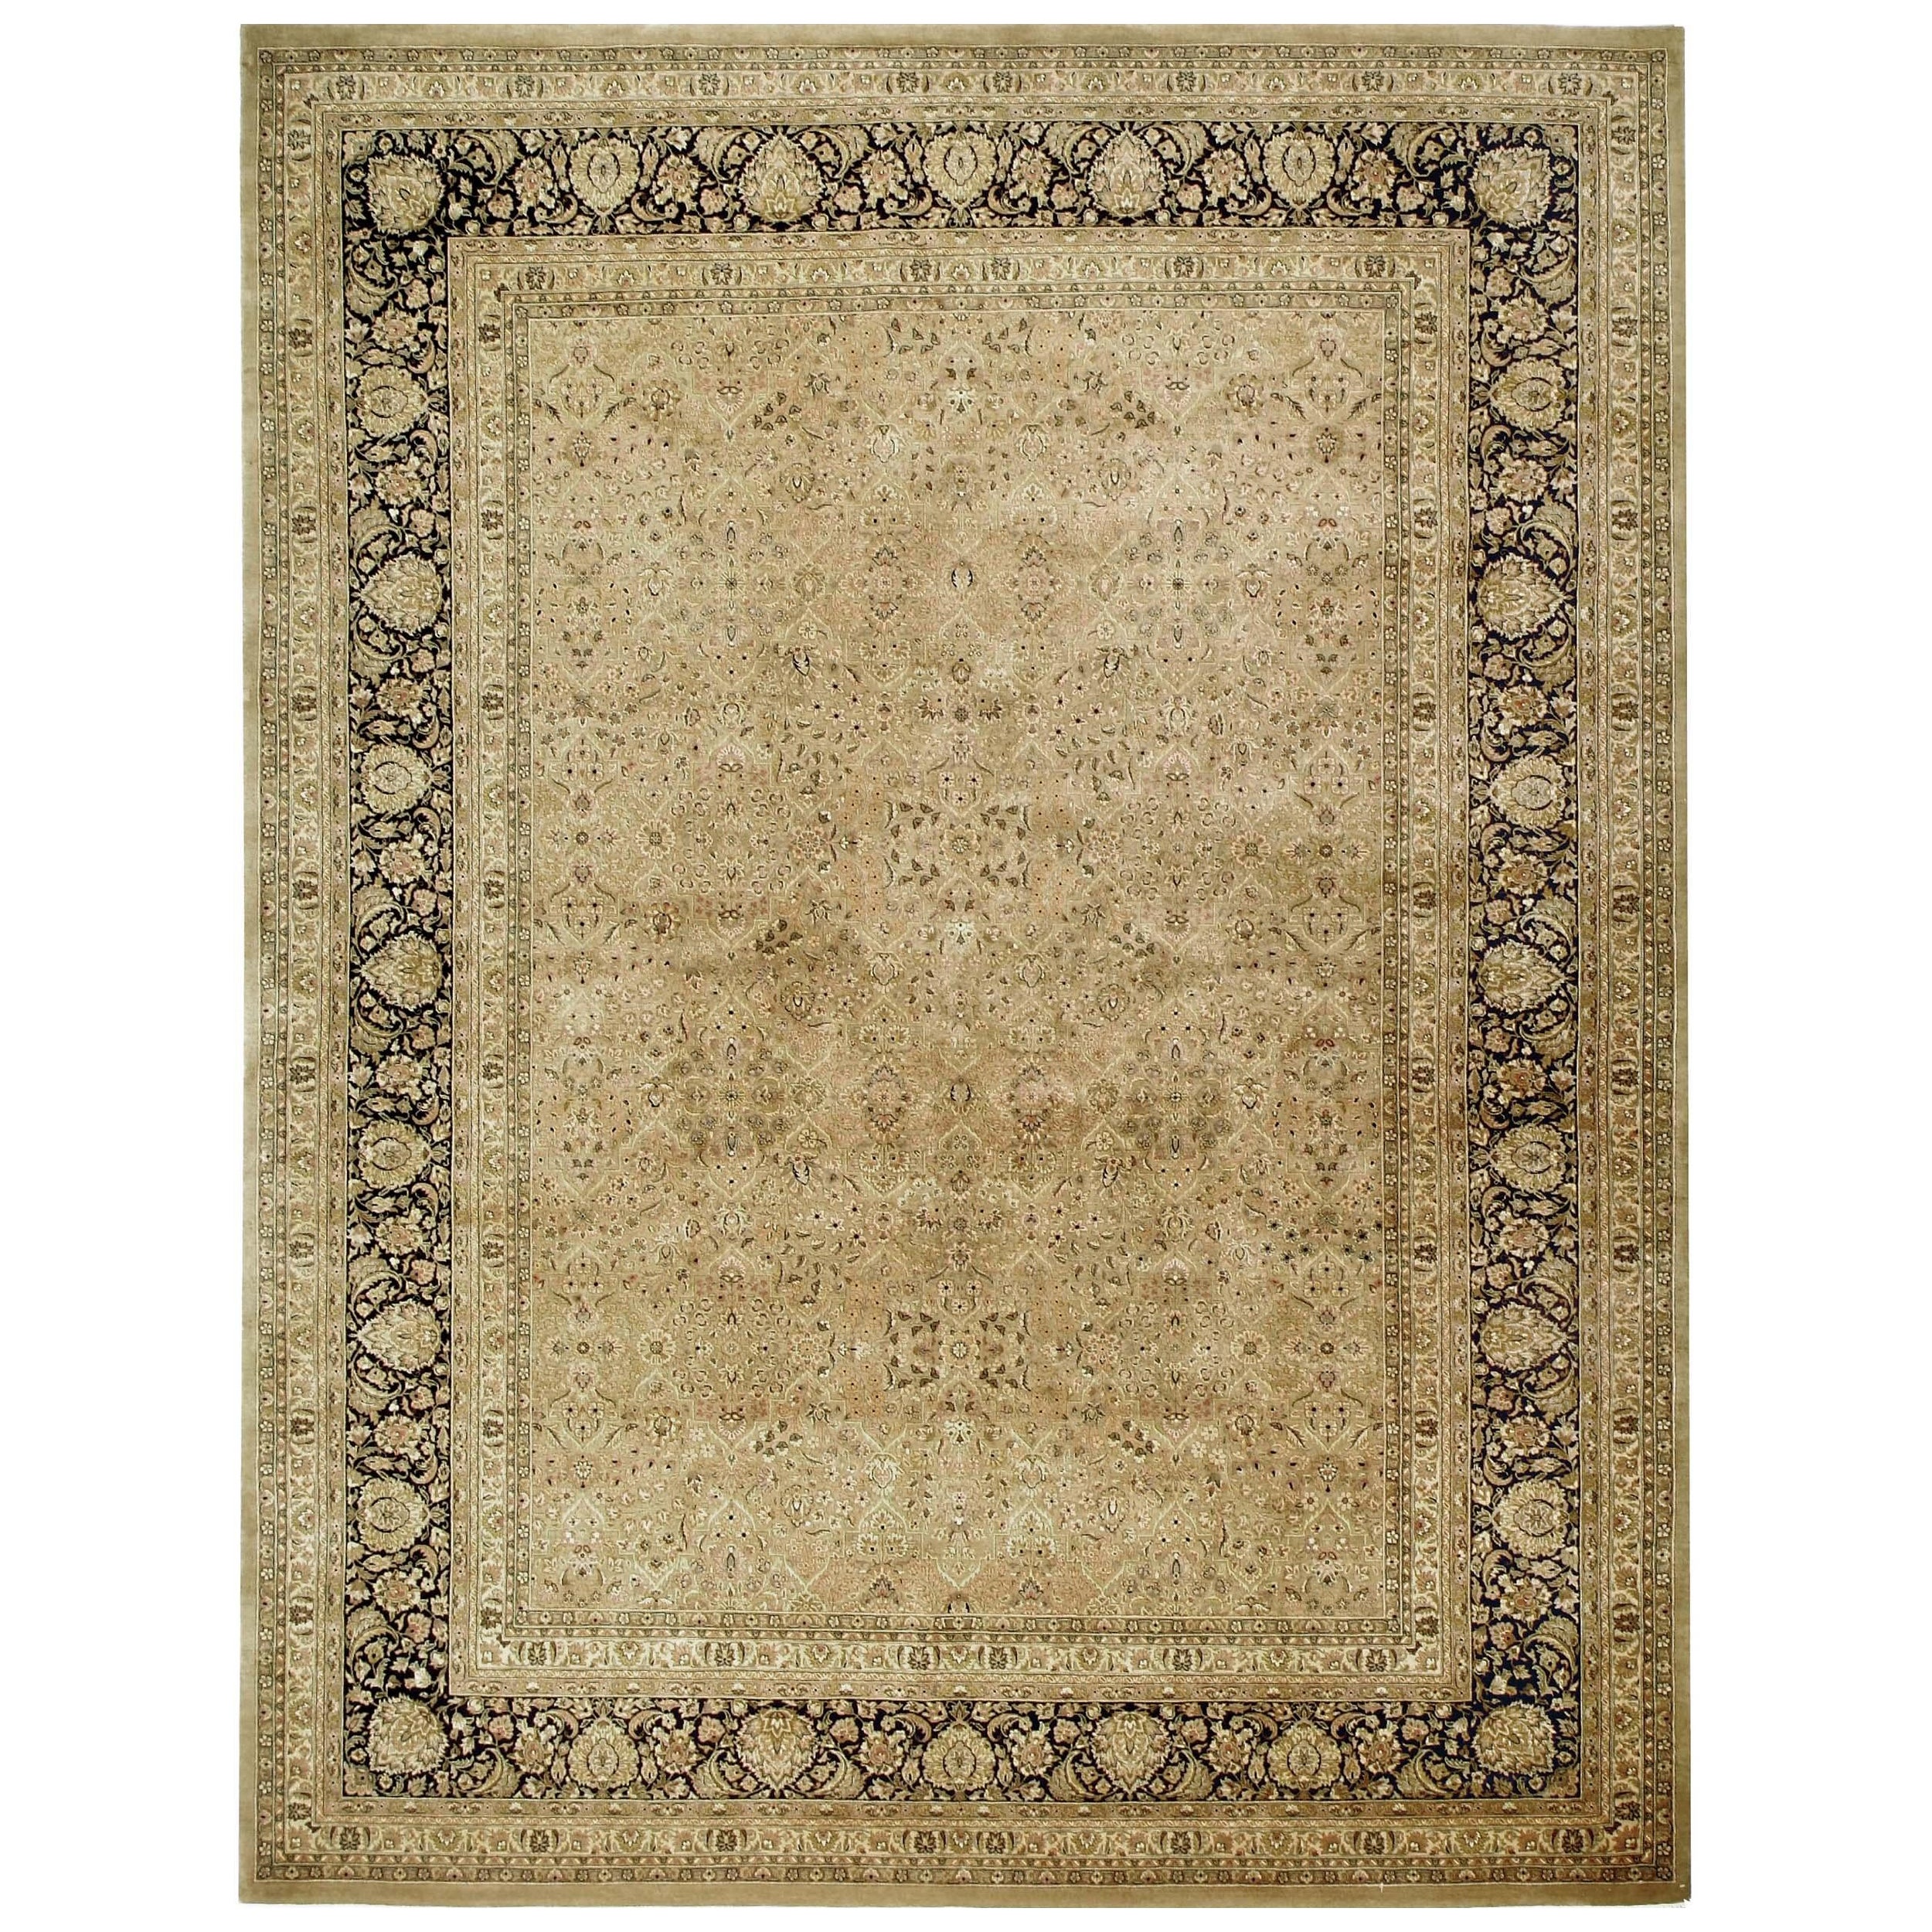 Luxury Traditional Hand-Knotted Ghoum Light Green & Black 12x18 Rug